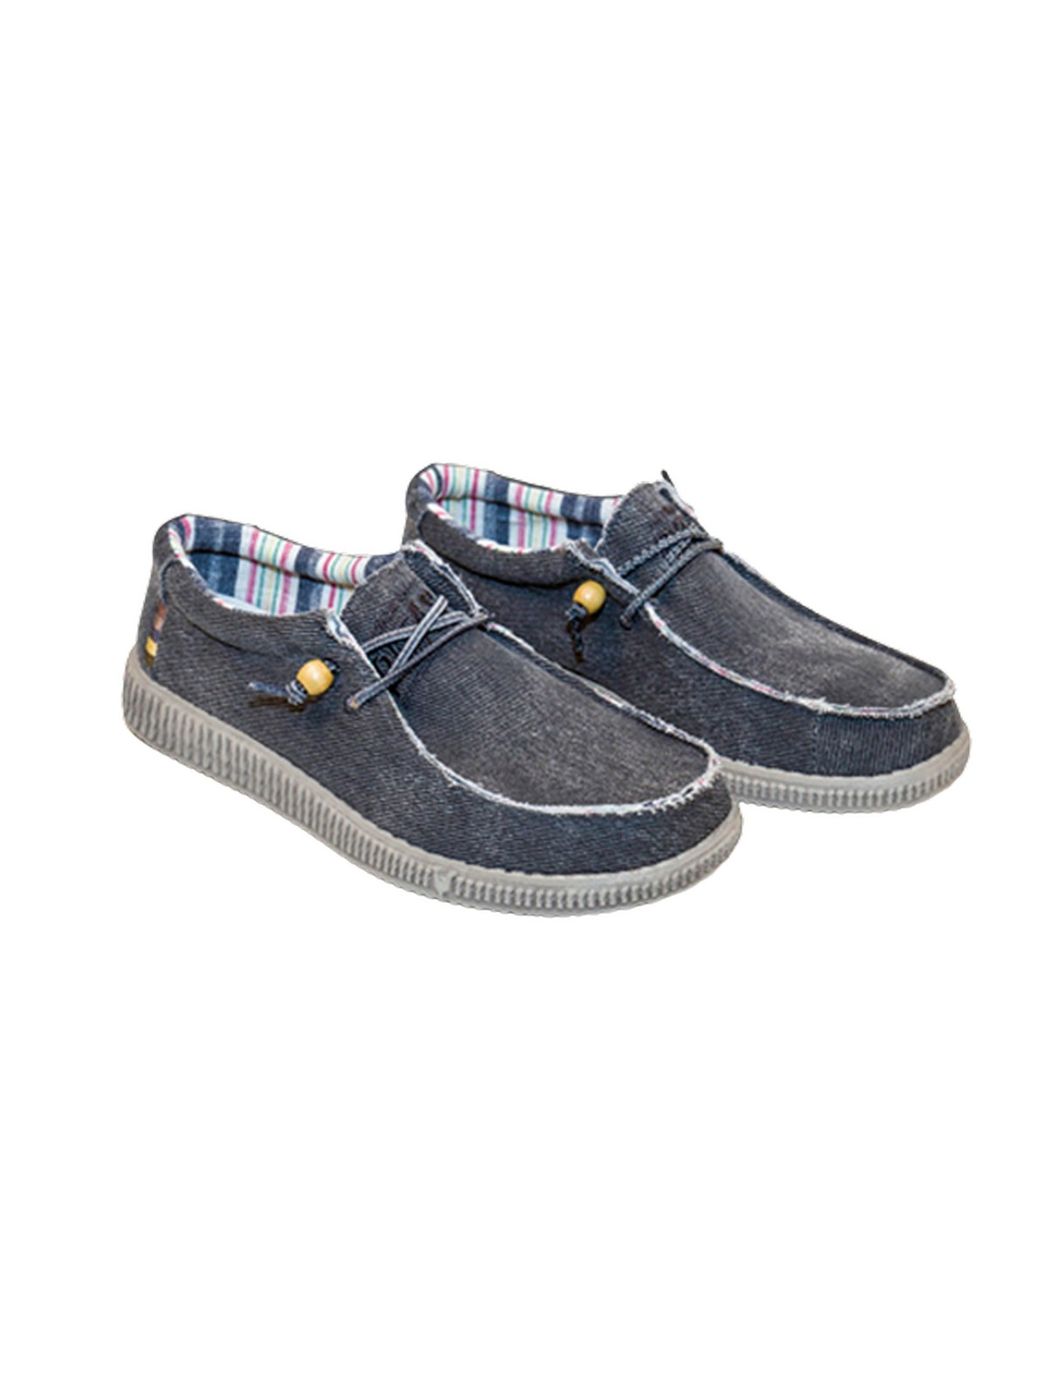 PITAS Mocassin Hommes WP150 RUSTIC WALLABY GRIS Gris